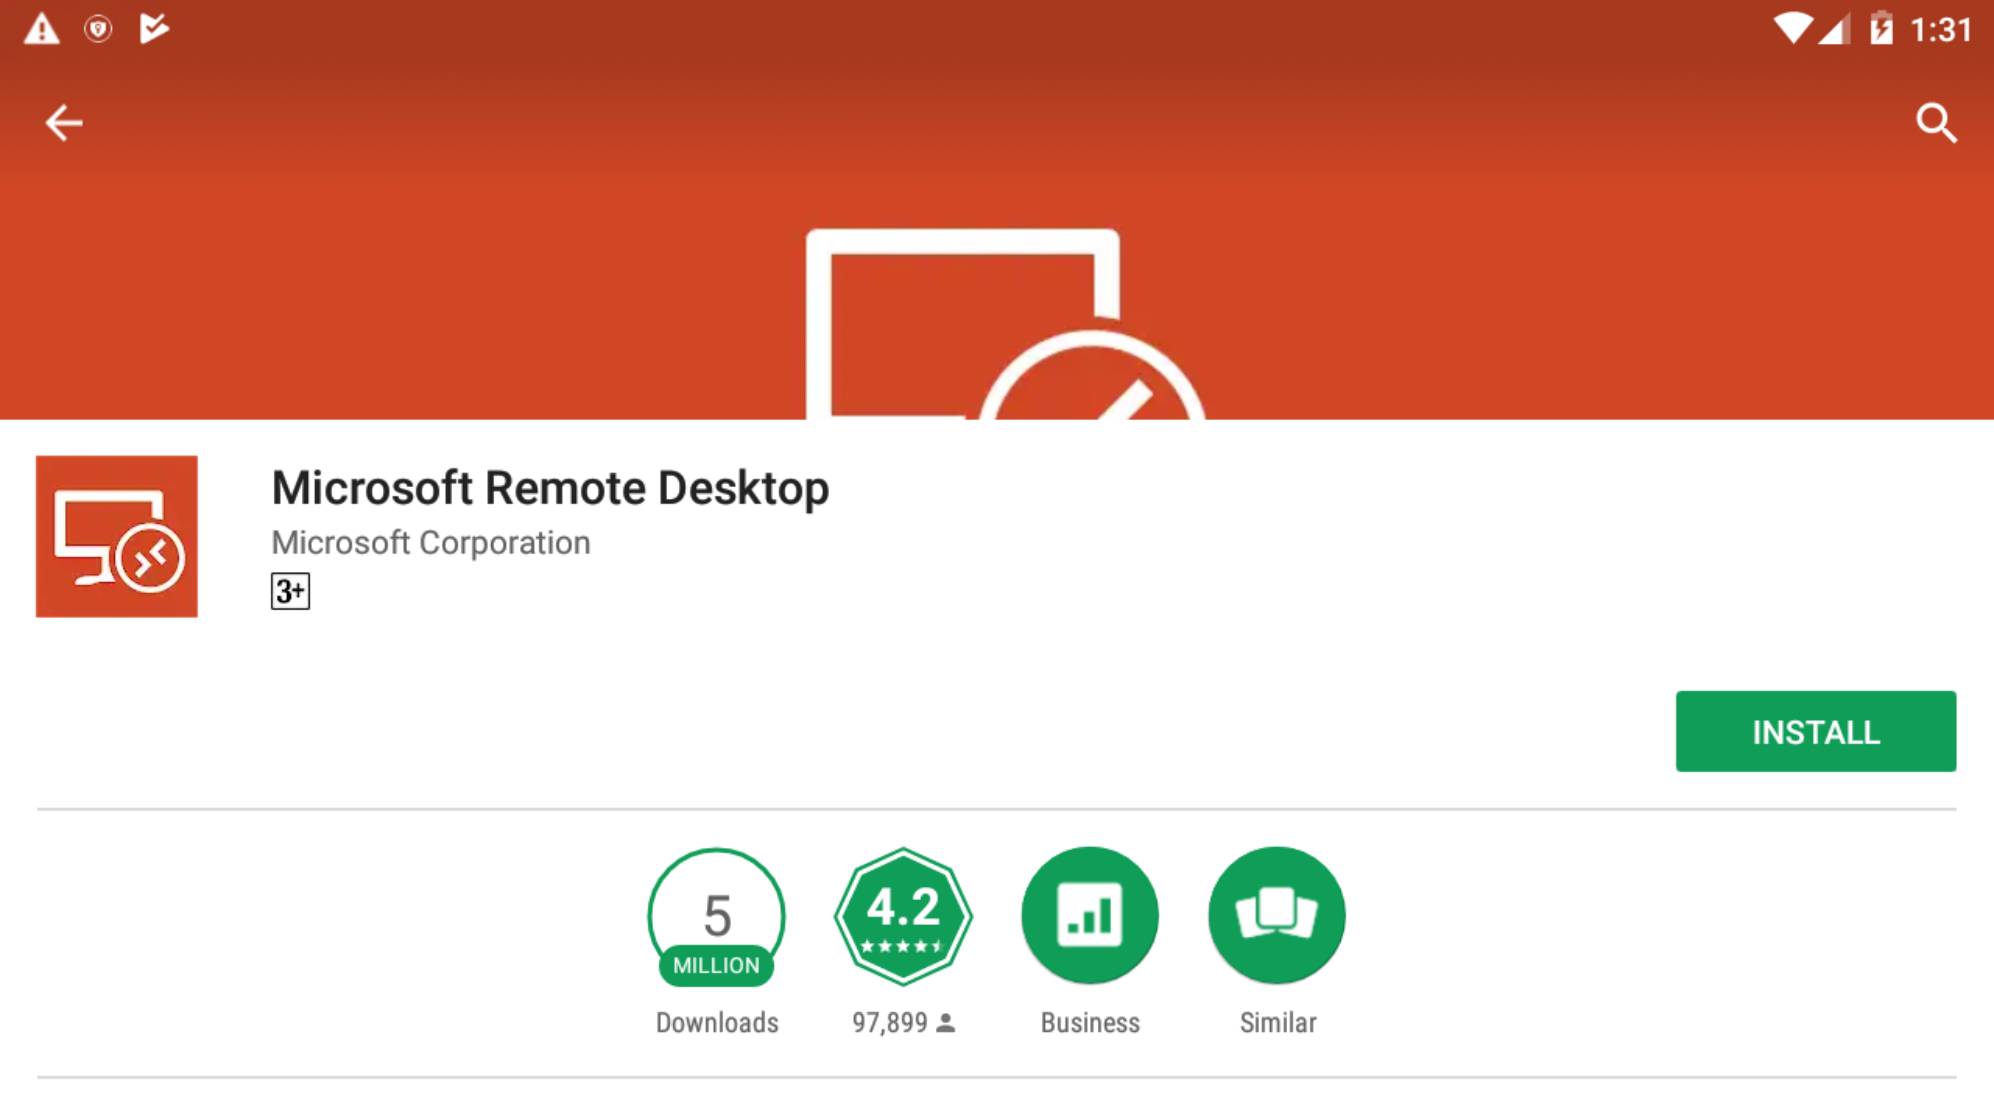 Download the Microsoft Remote Desktop app from Google Play